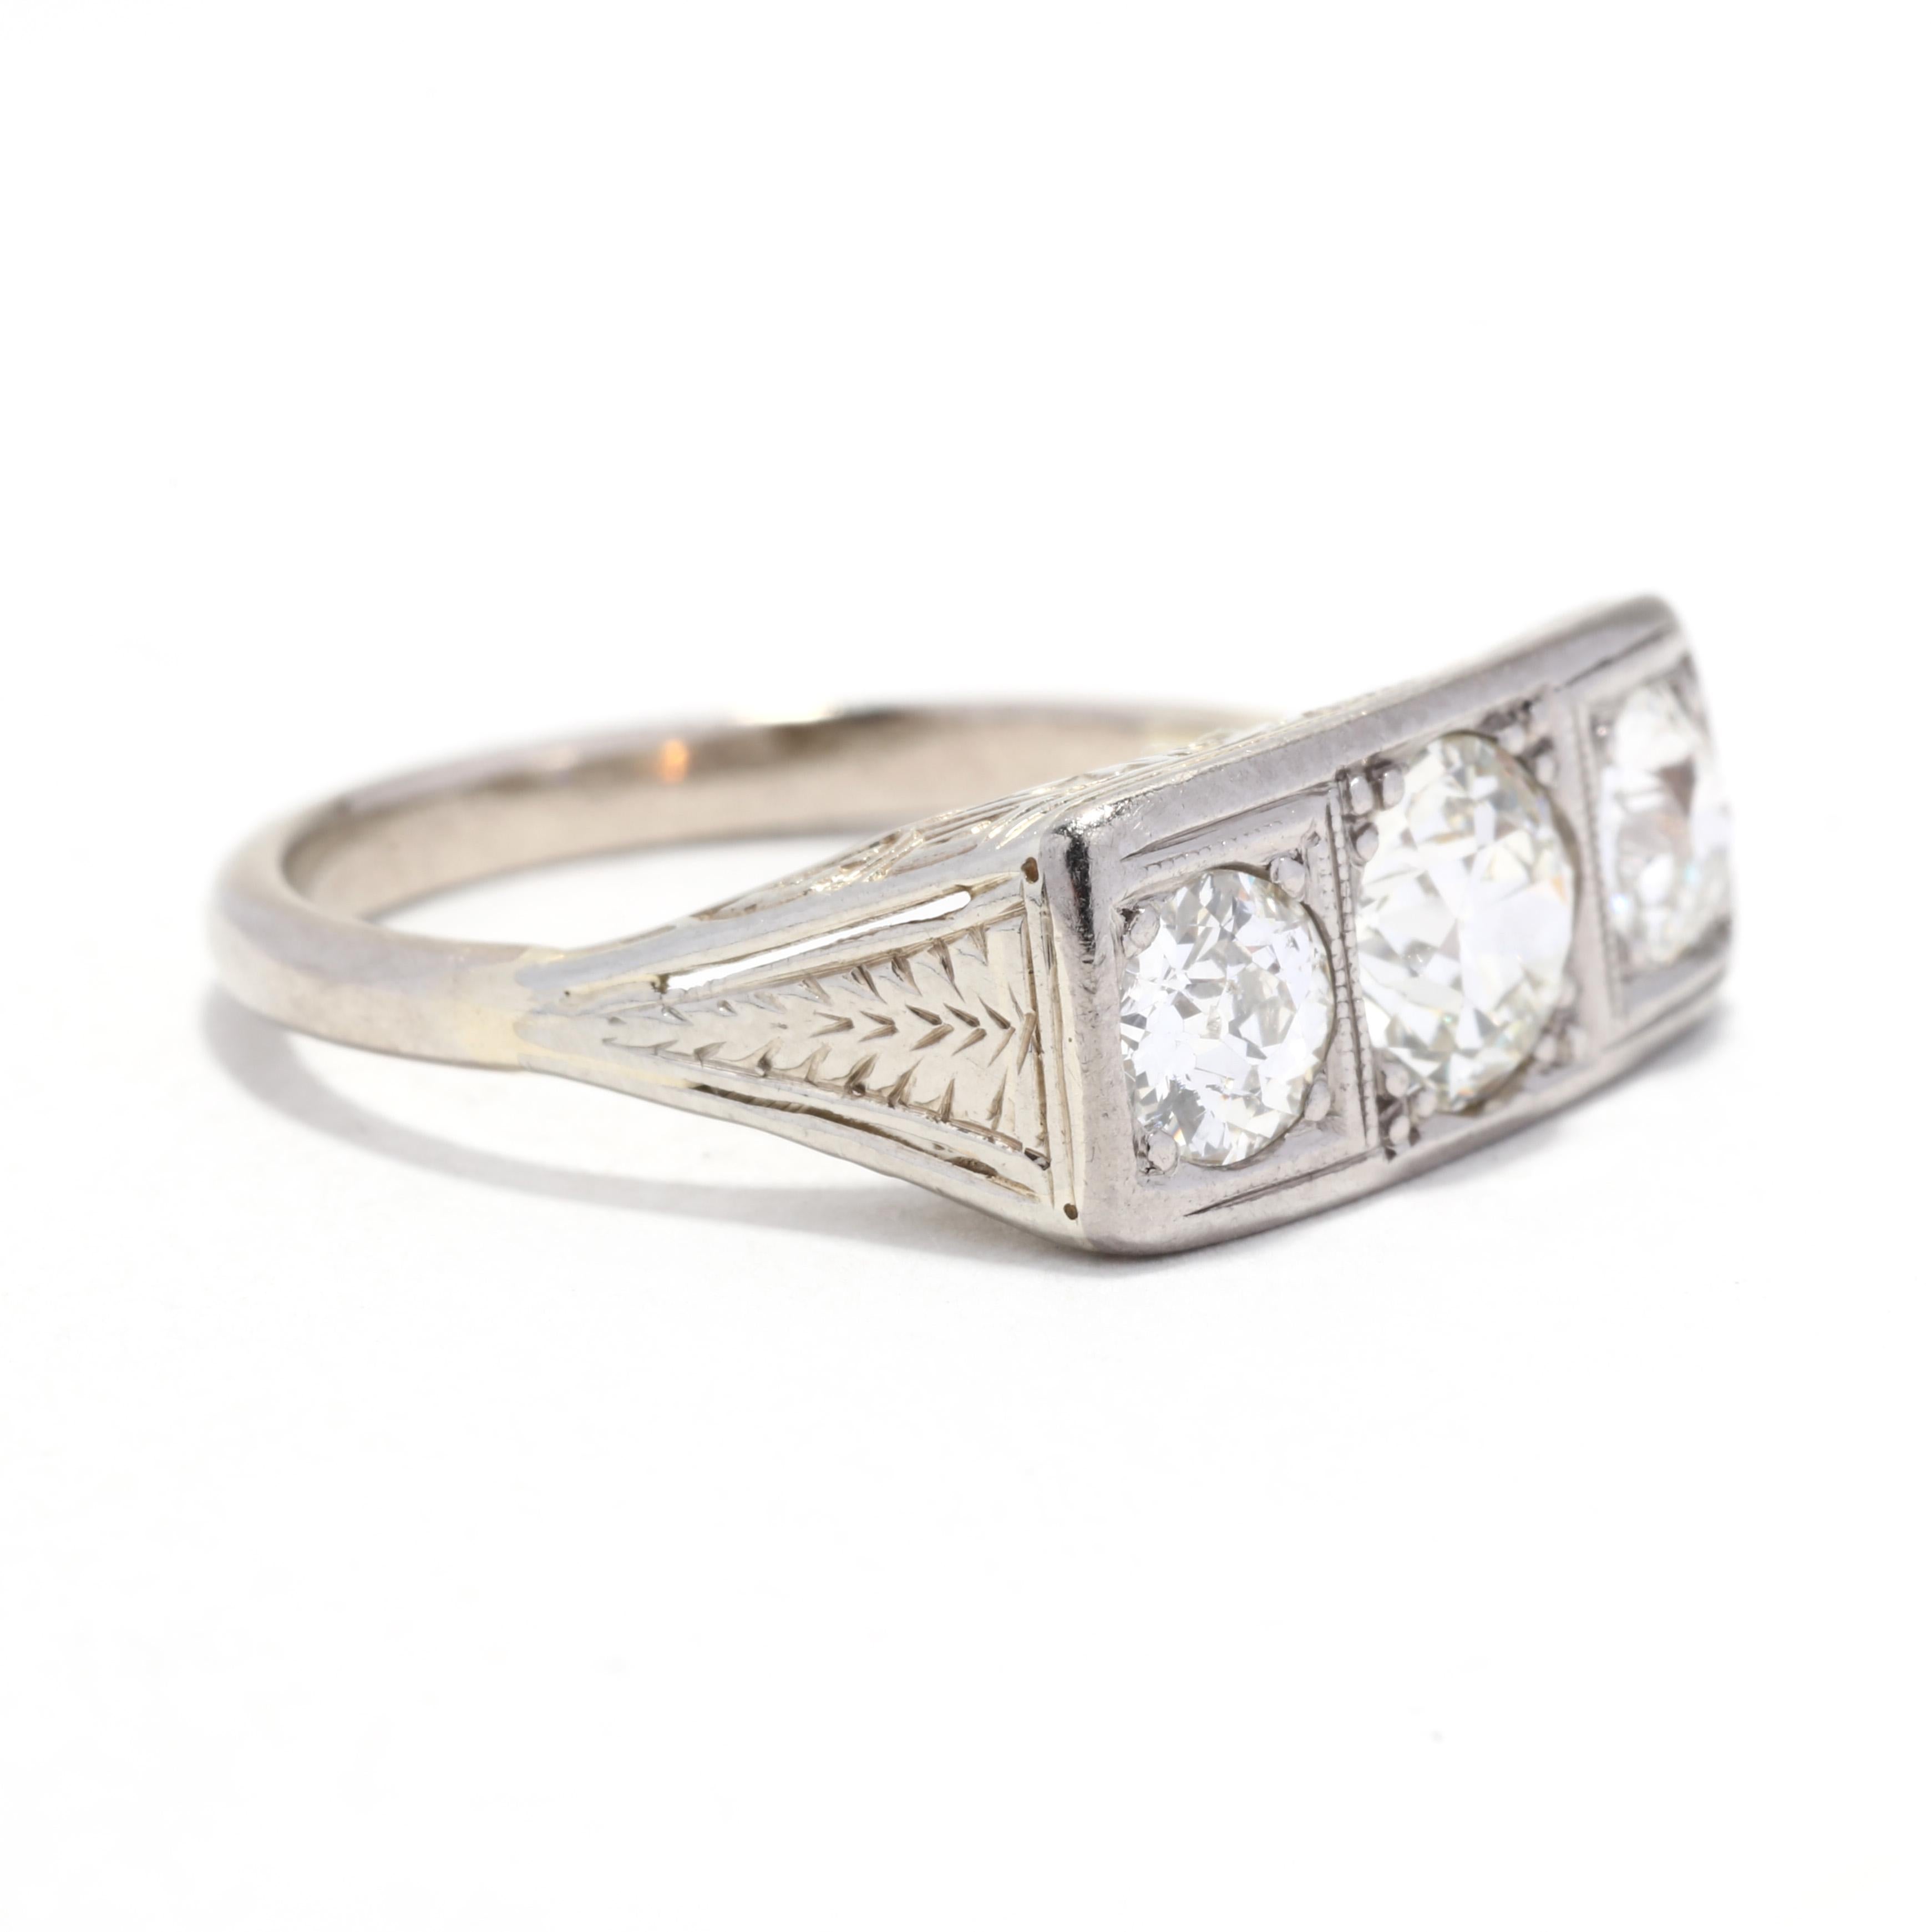 An Art Deco 14 karat white gold old European cut diamond three stone engagement ring. This antique engagement features a rectangular, horizontal design with a central old European cut diamond weighing approximately .75 carat with an old European cut